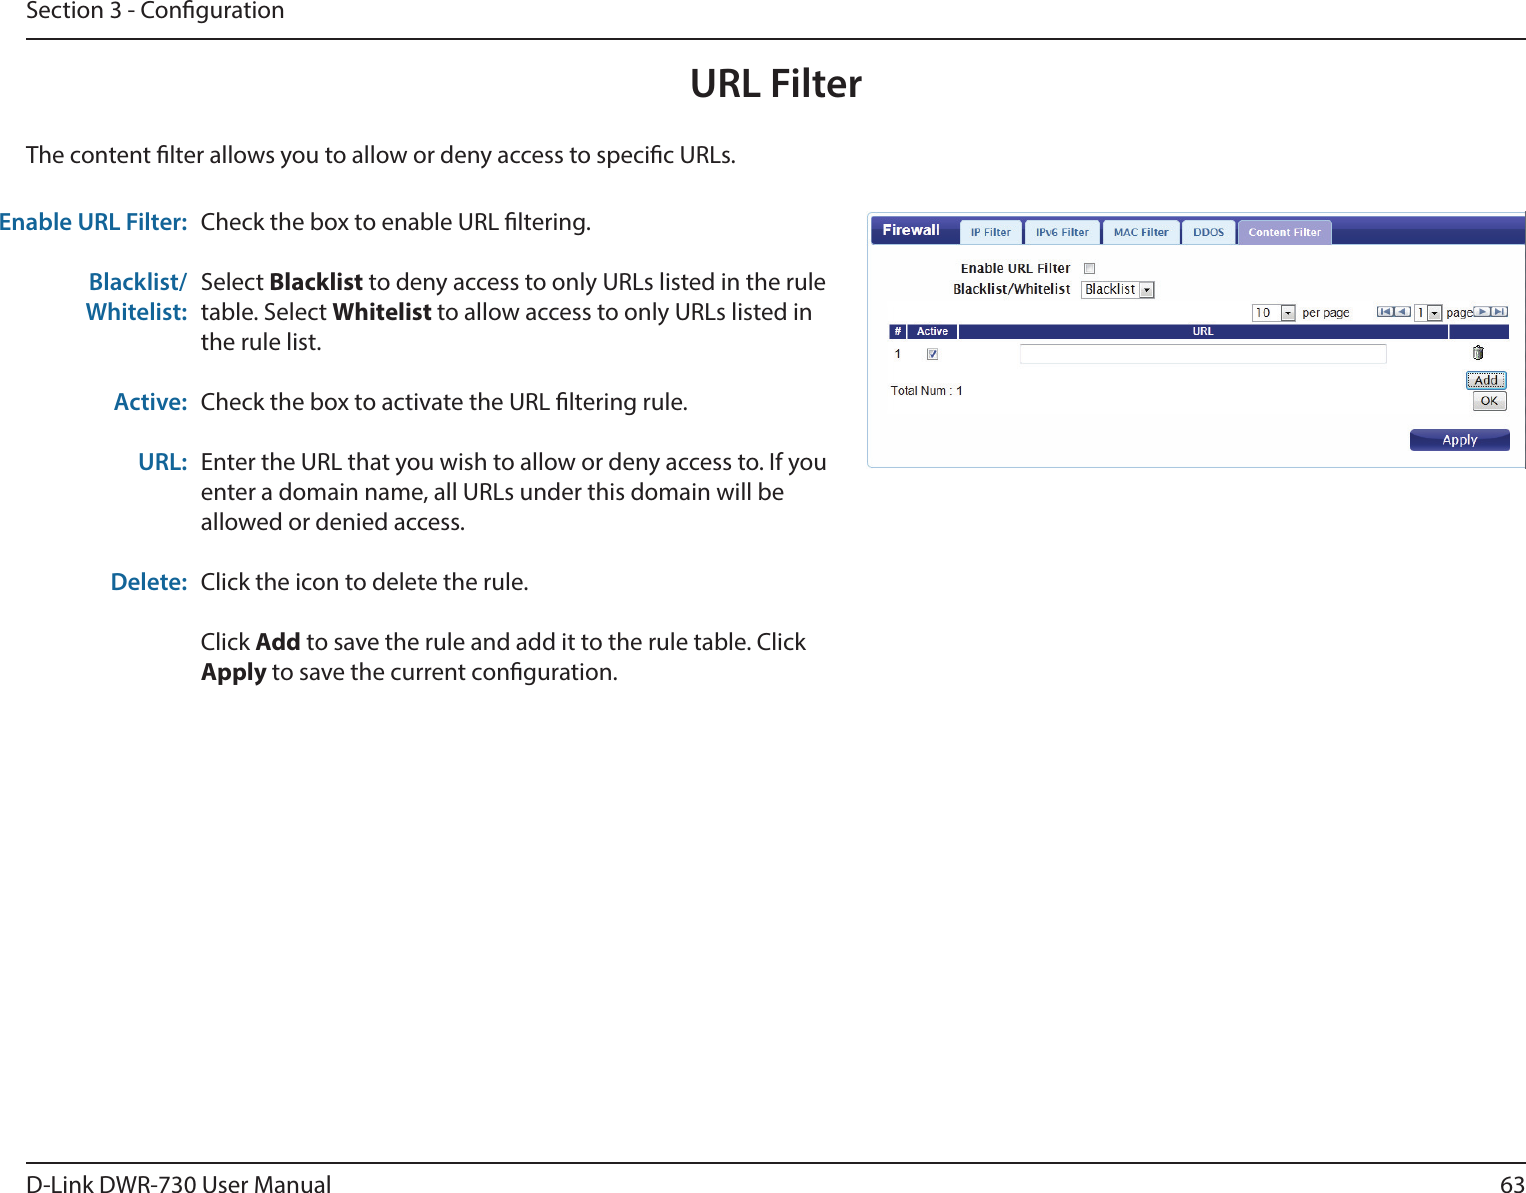 63D-Link DWR-730 User ManualSection 3 - CongurationURL FilterCheck the box to enable URL ltering.Select Blacklist to deny access to only URLs listed in the rule table. Select Whitelist to allow access to only URLs listed in the rule list. Check the box to activate the URL ltering rule. Enter the URL that you wish to allow or deny access to. If you enter a domain name, all URLs under this domain will be allowed or denied access.Click the icon to delete the rule. Click Add to save the rule and add it to the rule table. Click Apply to save the current conguration. Enable URL Filter:Blacklist/Whitelist:Active:URL:Delete:The content lter allows you to allow or deny access to specic URLs.